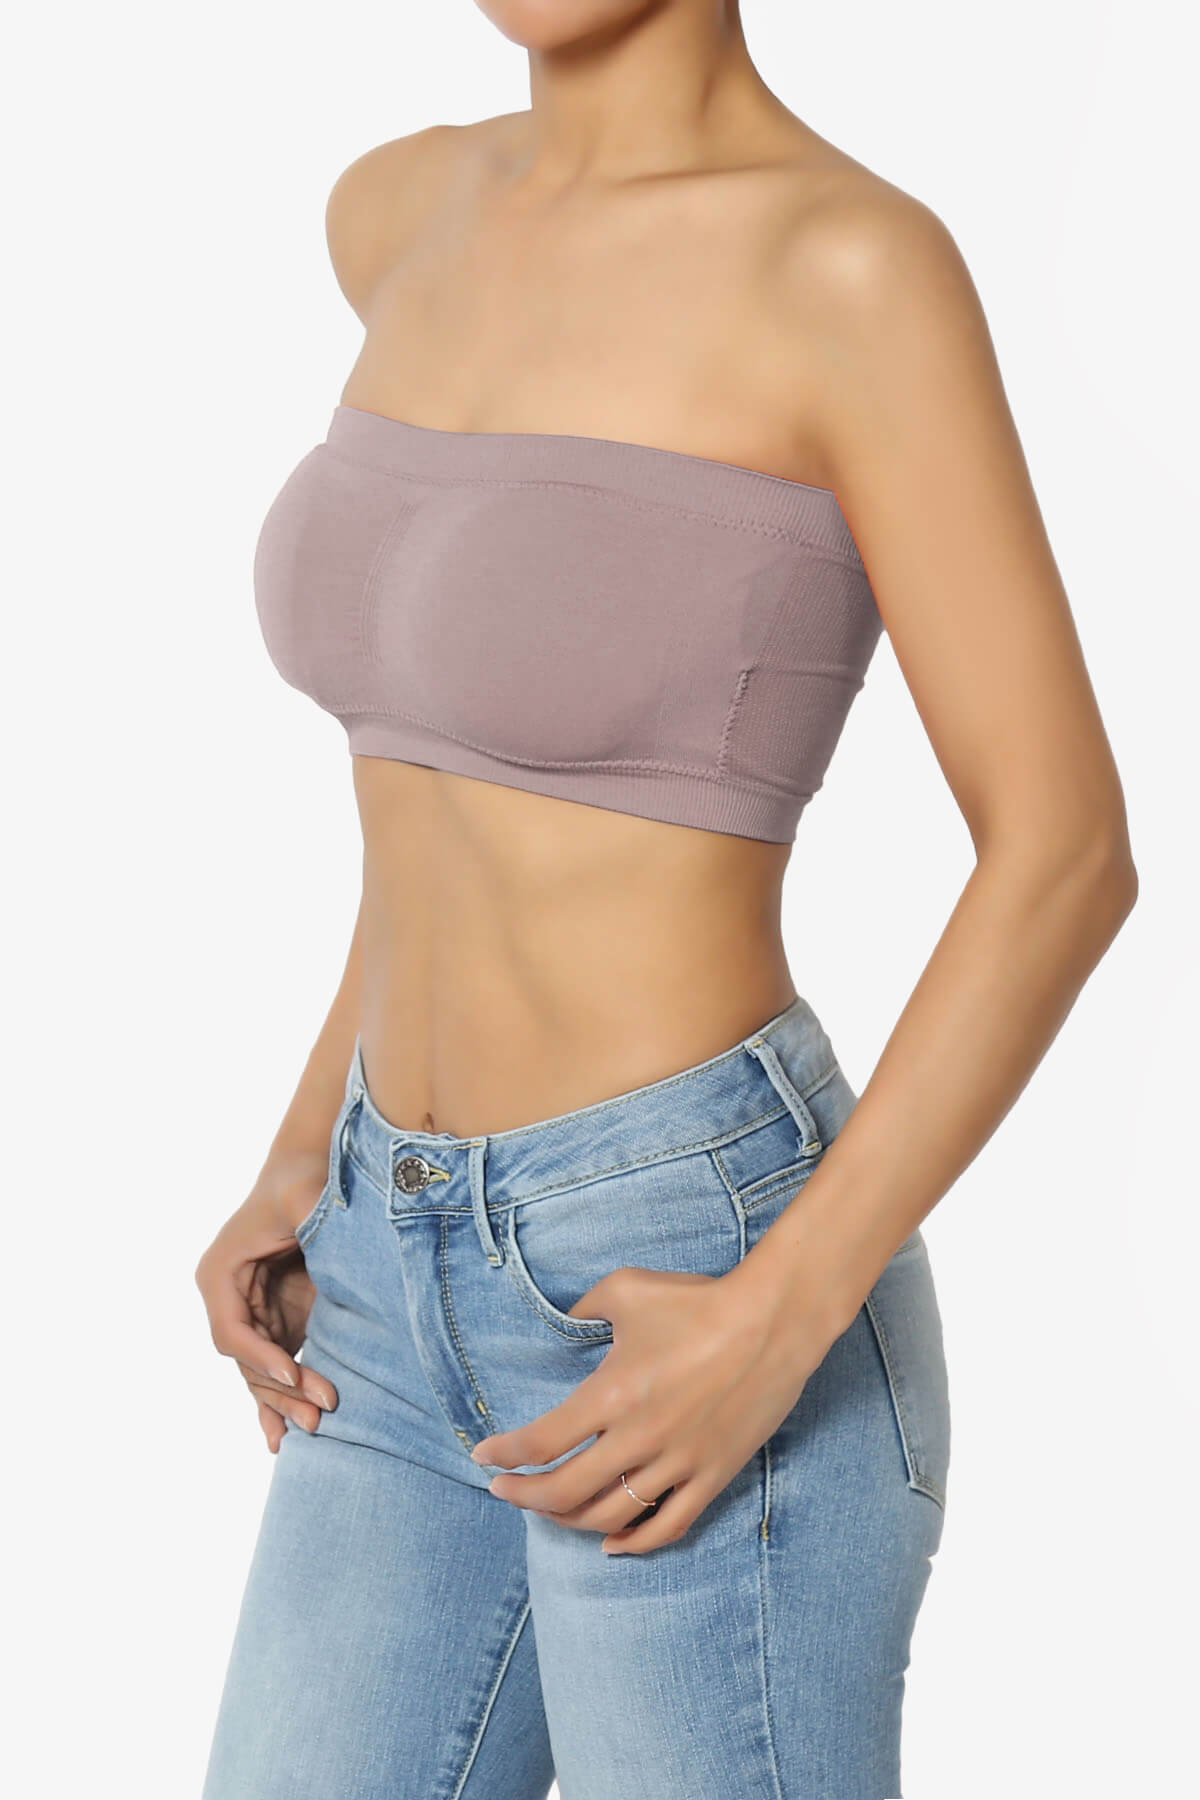 Womens Tube Top/Tube Bra with detectable Pad, Strapless, Seamless